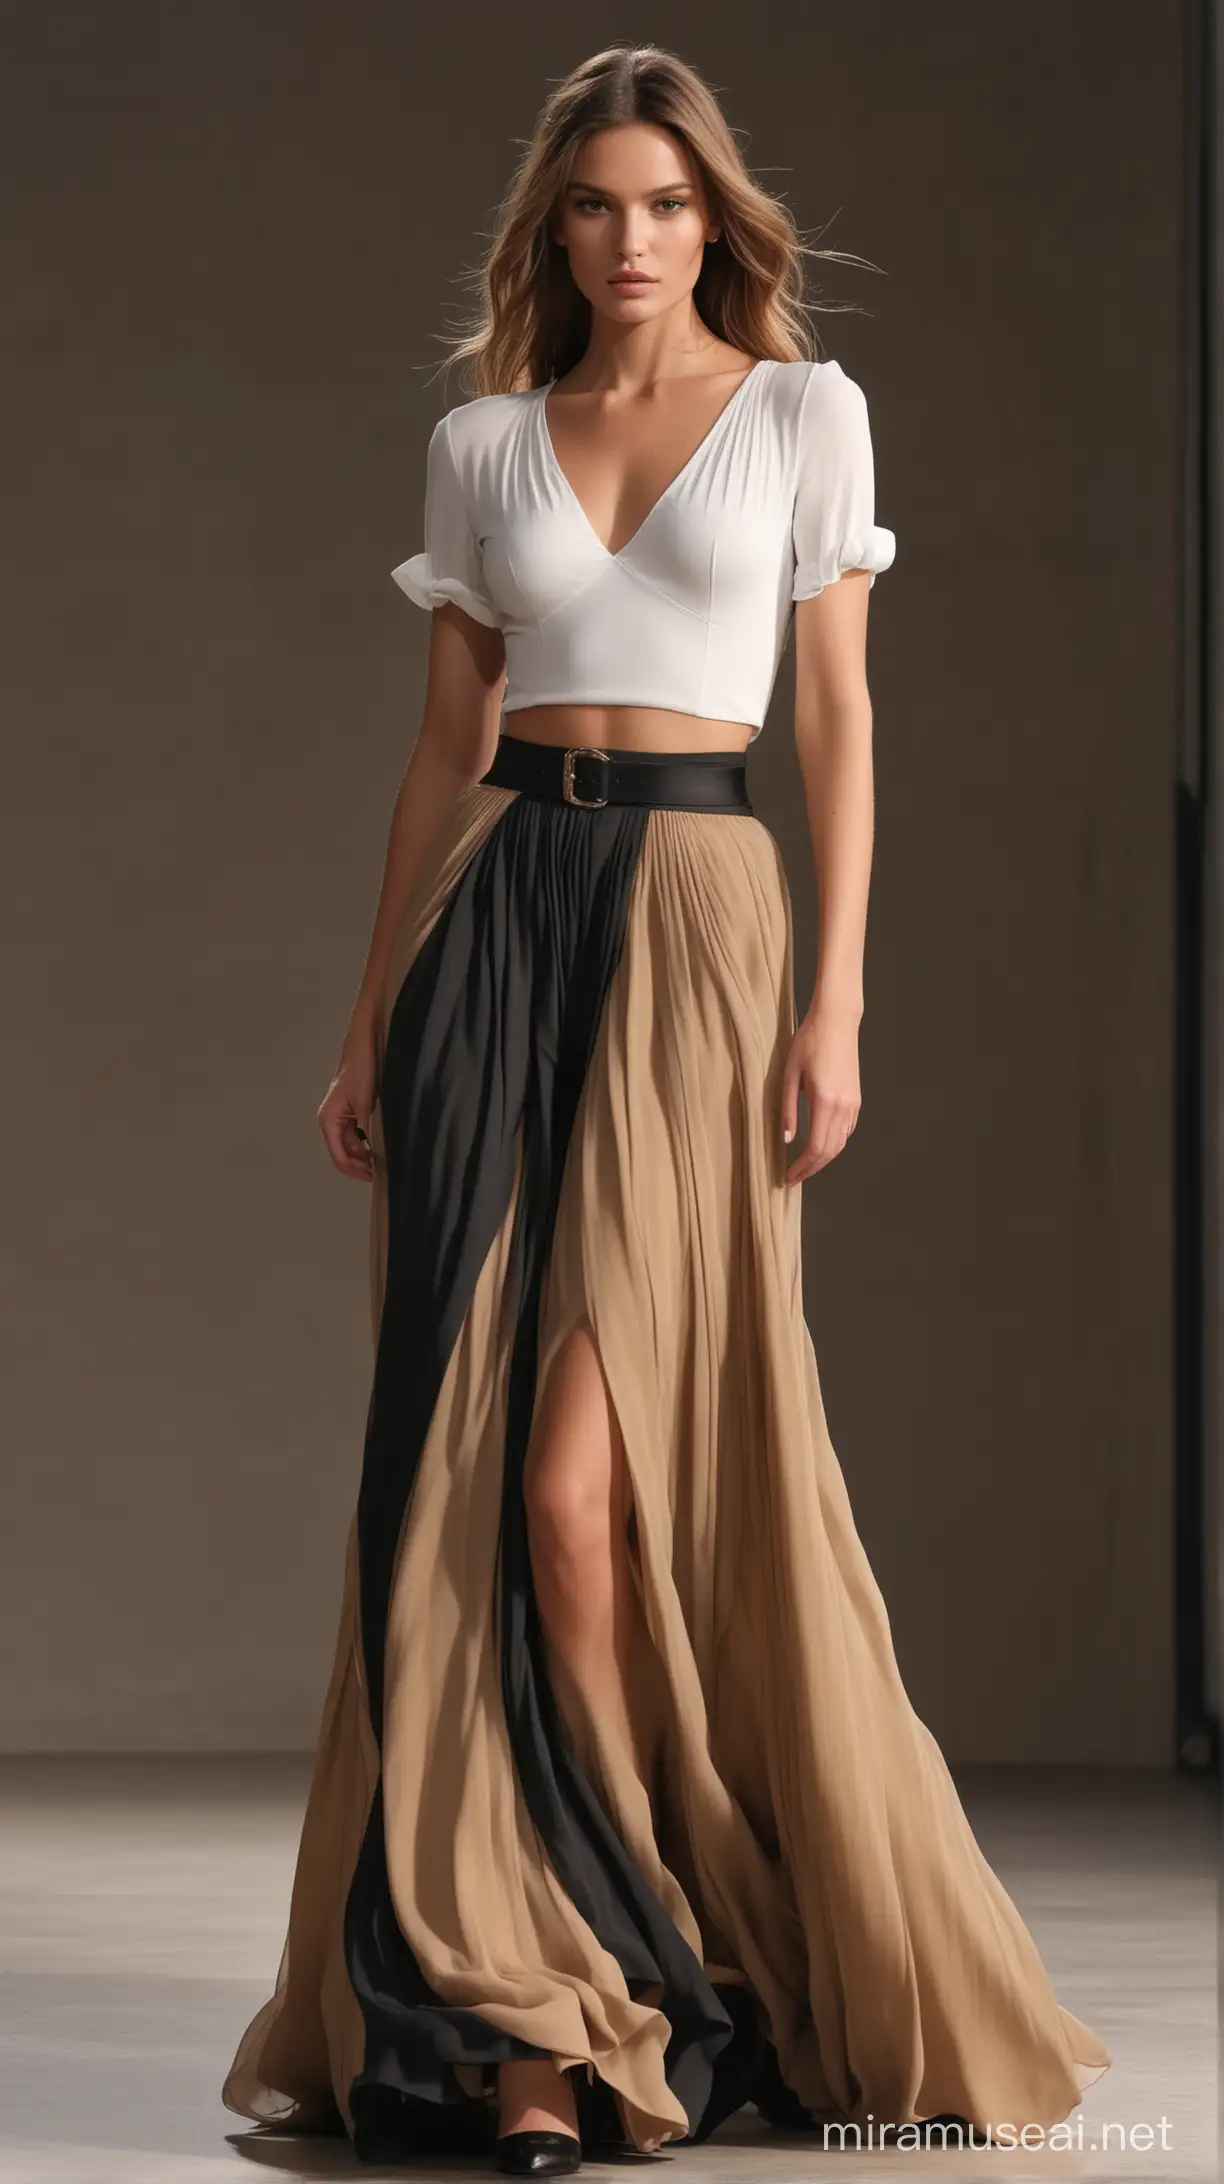 Stunning supermodel runway motion for Montelago brand, front angle, wearing white top and very long flowy, 2 colors(camel and black charcoal) chiffon skirt, hands in the pockets , hyper-realistic, Alexander McQueen style
